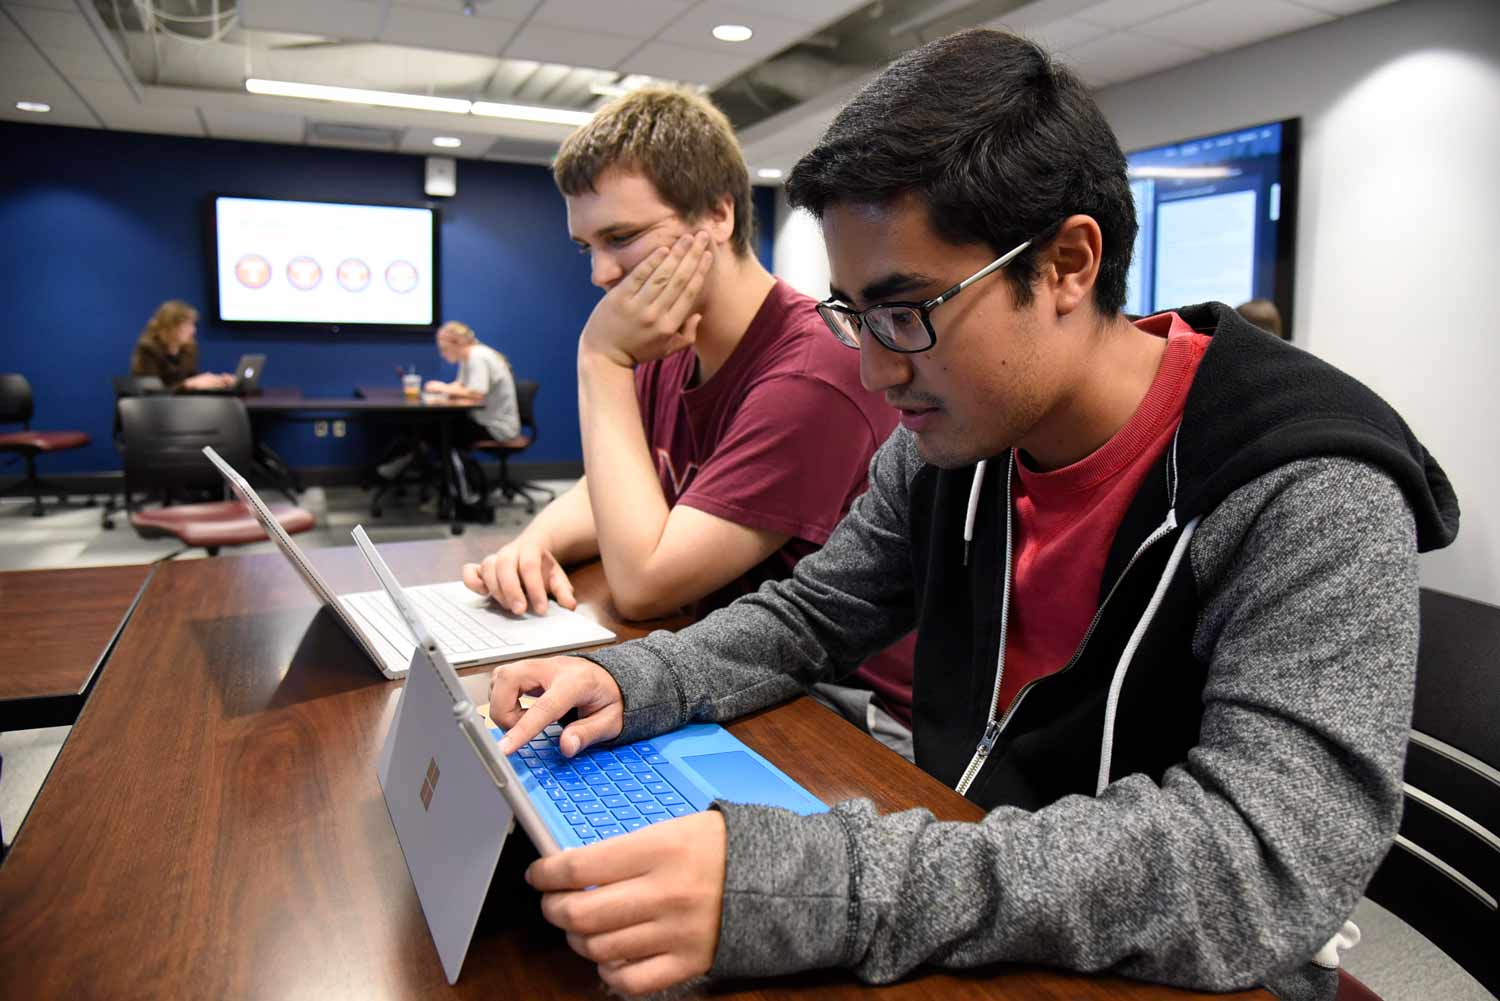 Two Virginia Tech students working on their laptops in a multi-purpose room.